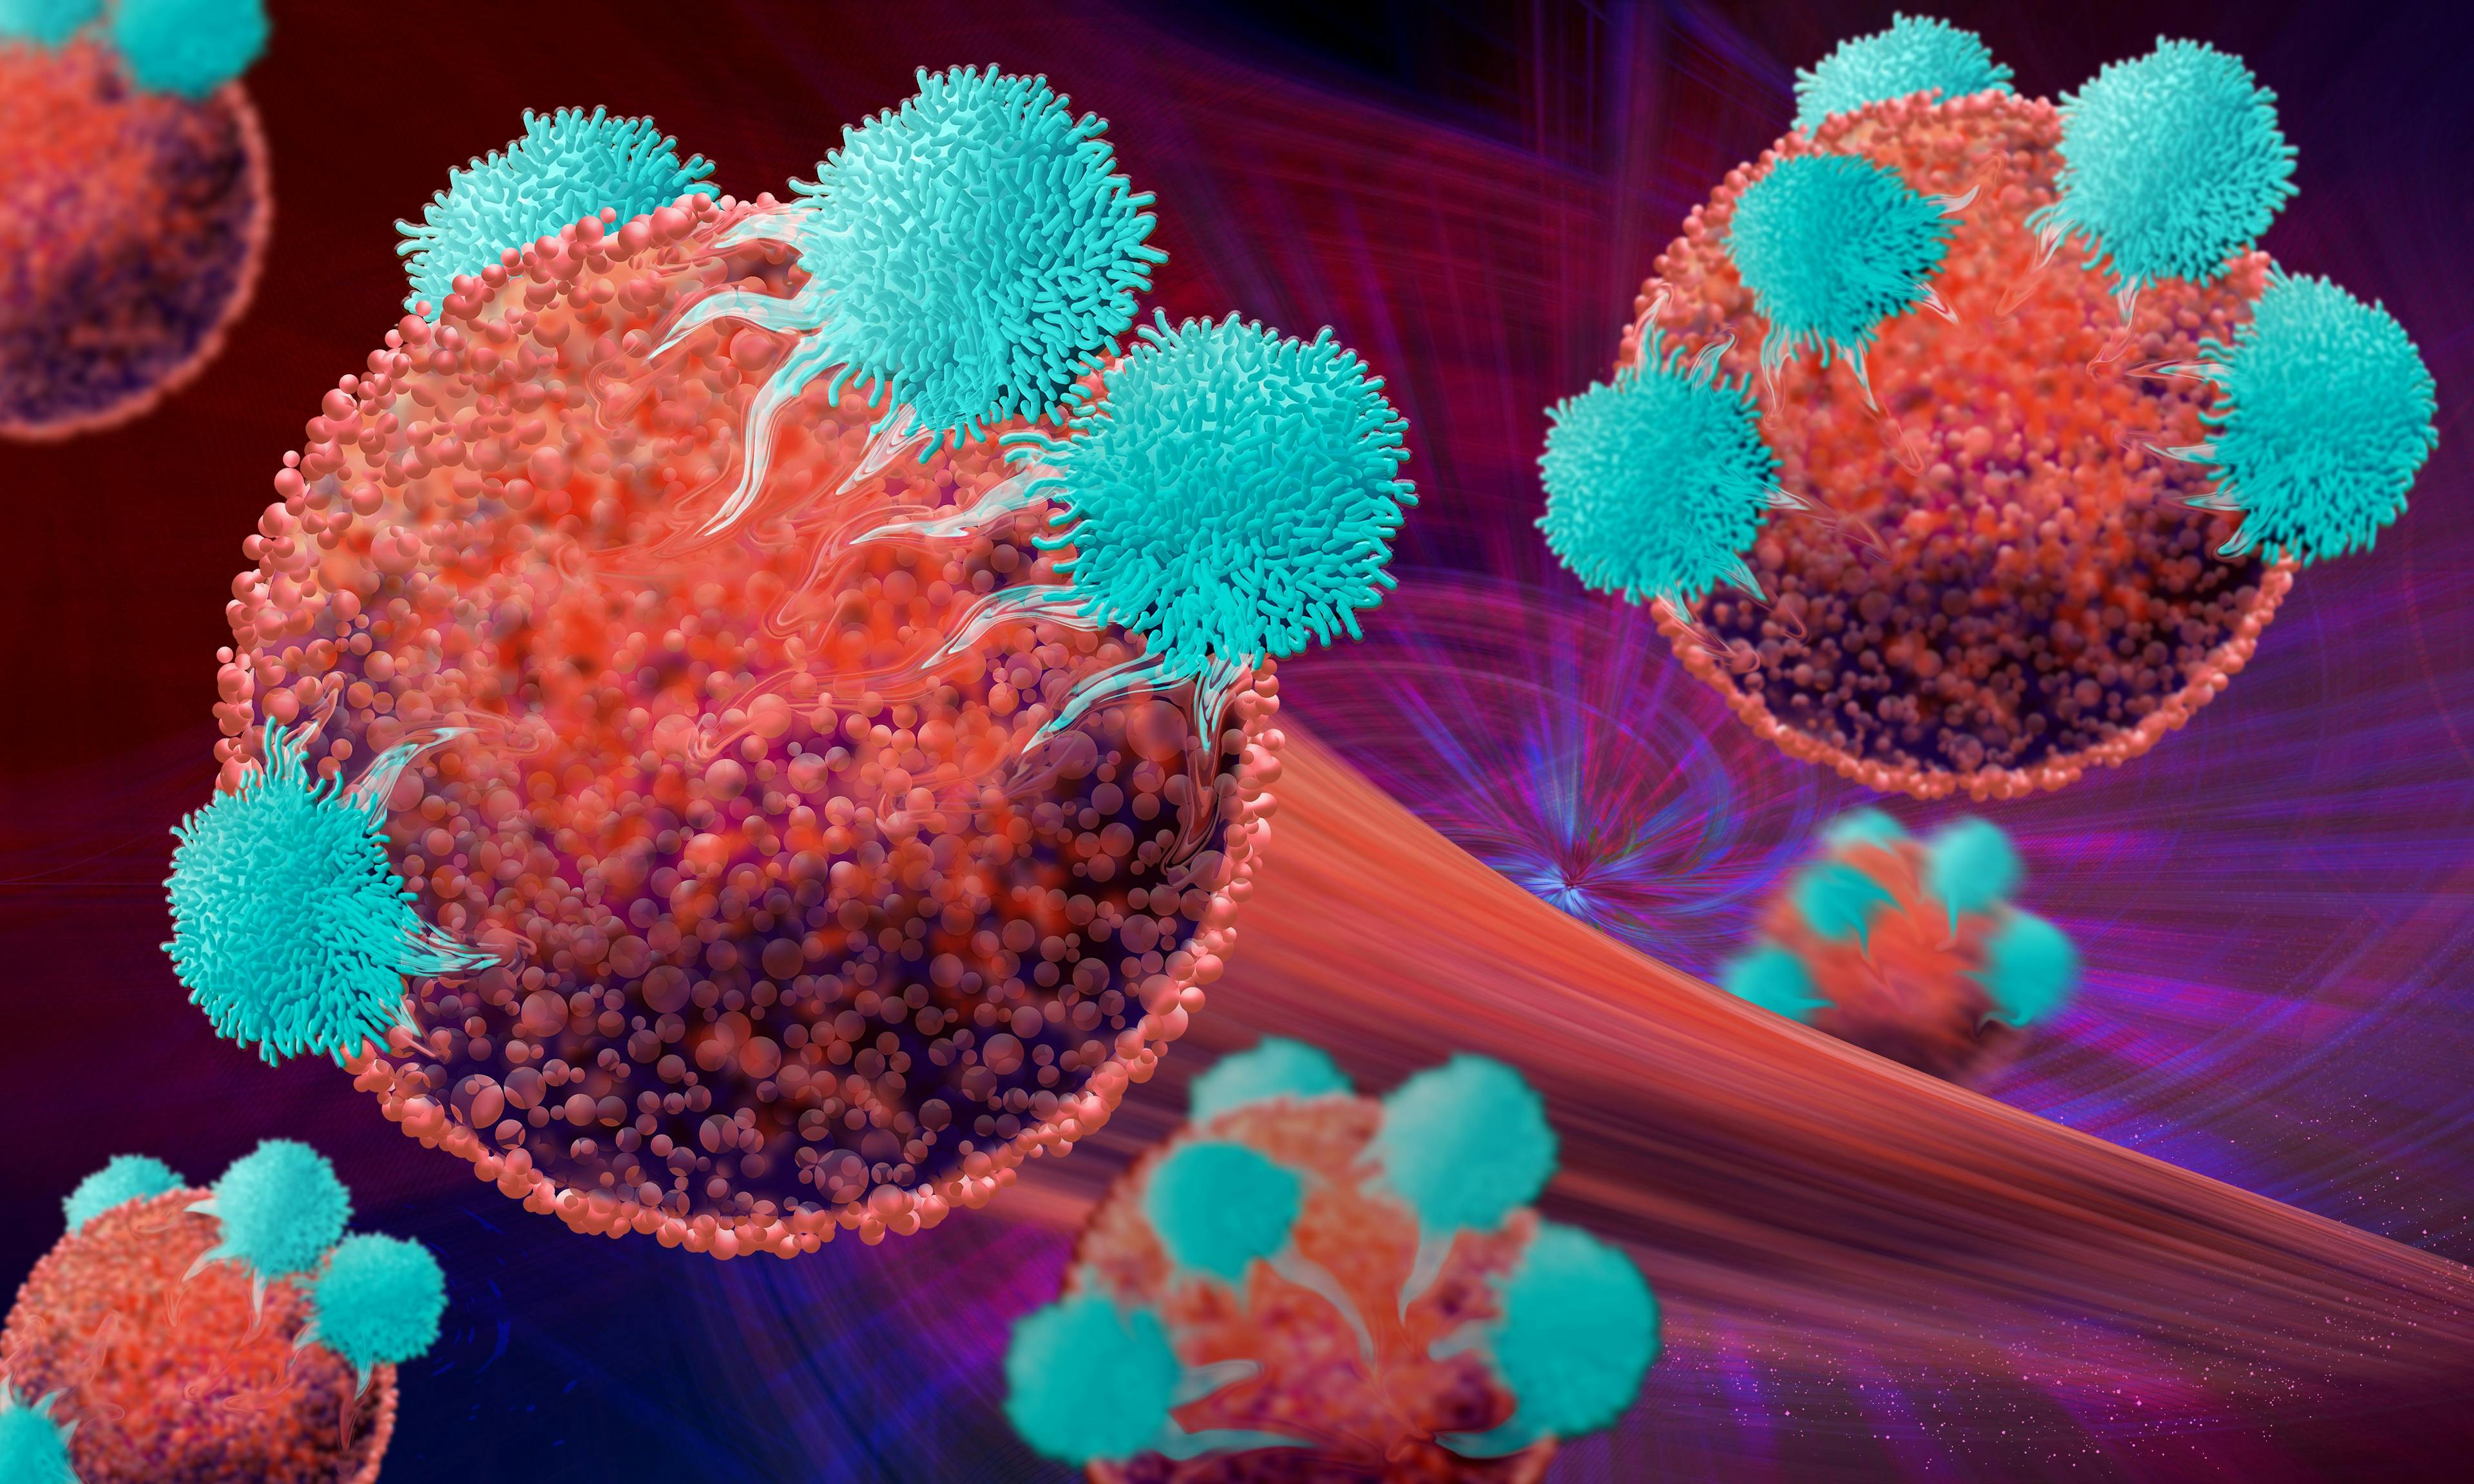 Cancer cells treated with immunotherapy